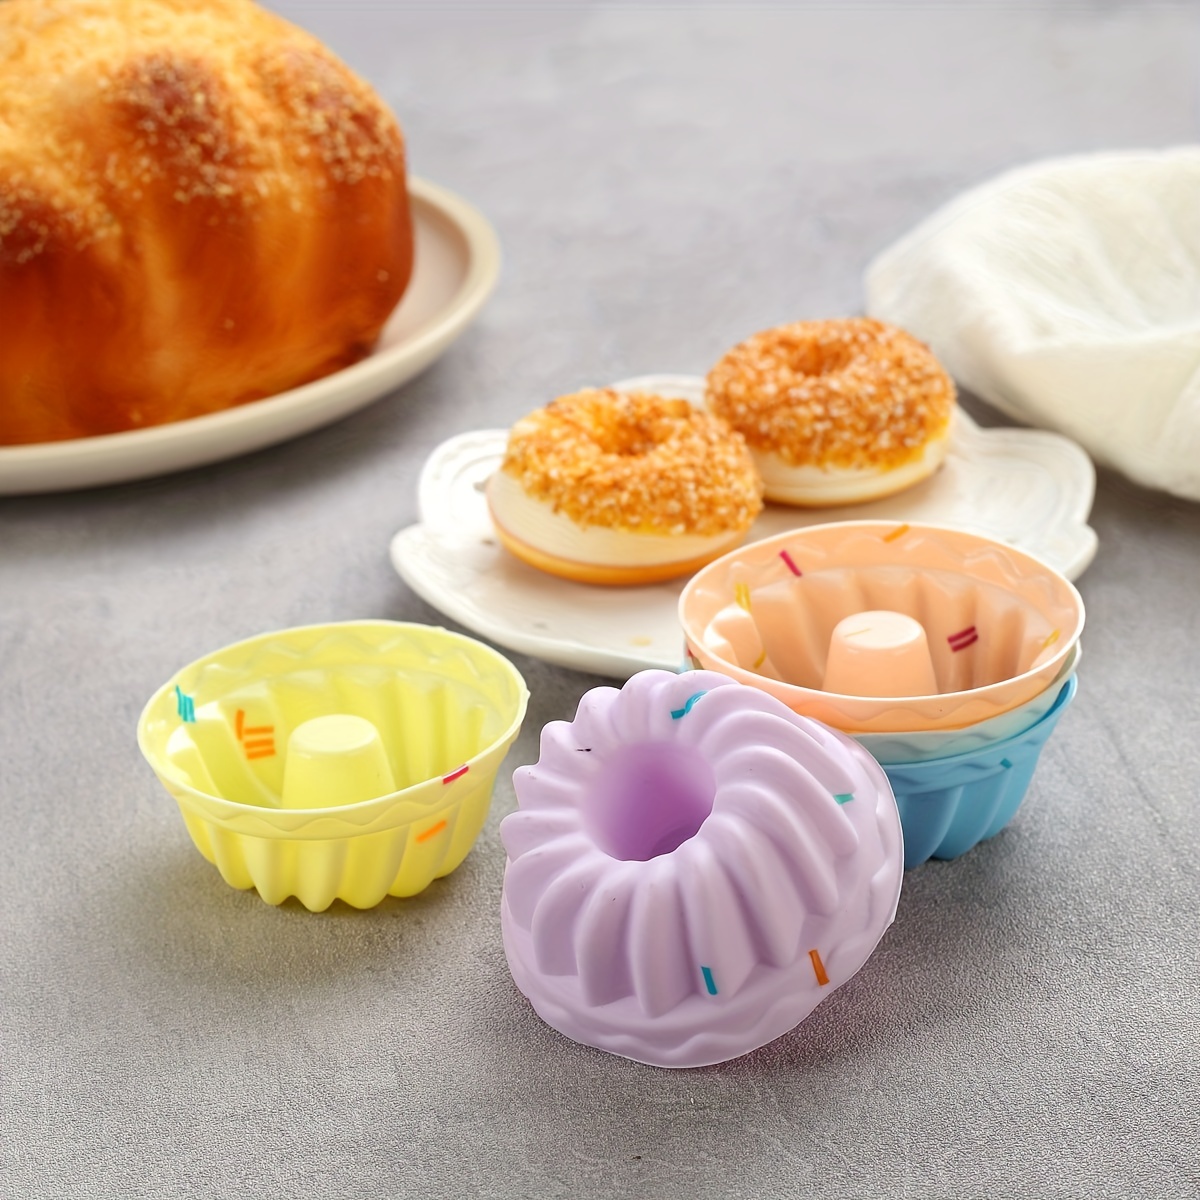 Silicone Cupcake Baking Cups Set, Silicone Cake Cups For Baking, 8